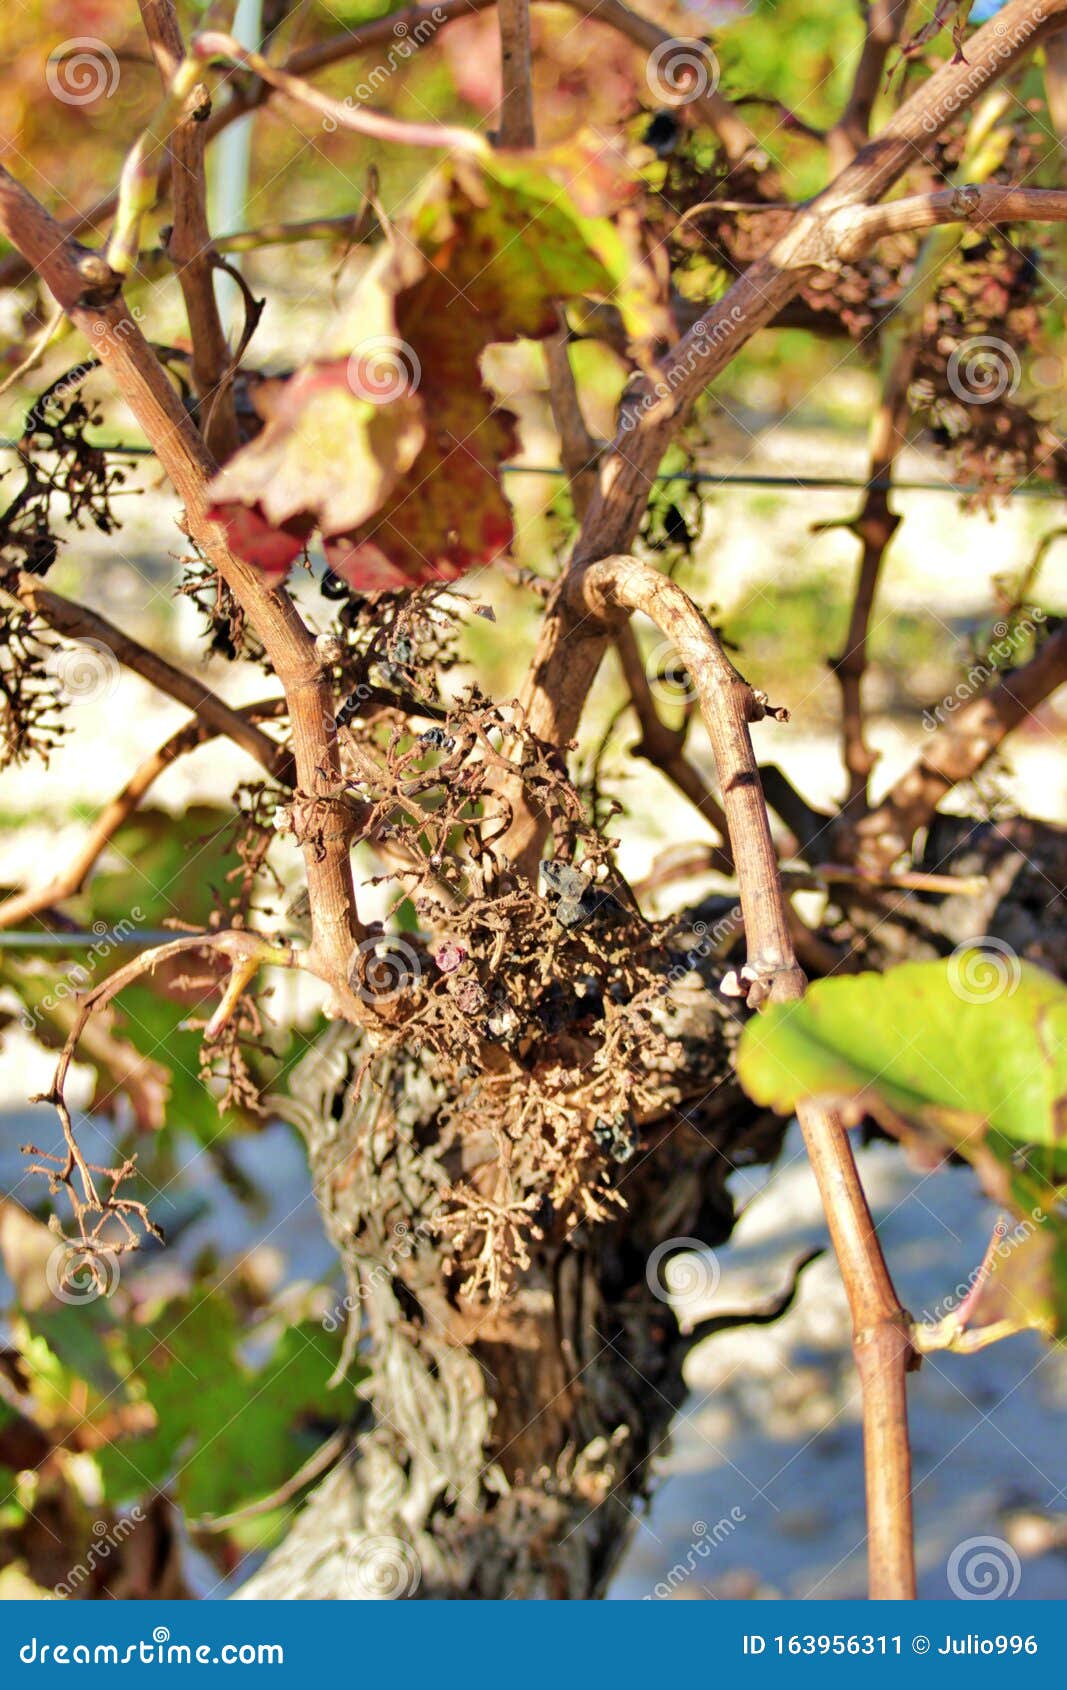 vineyard devastated by a fungal plague